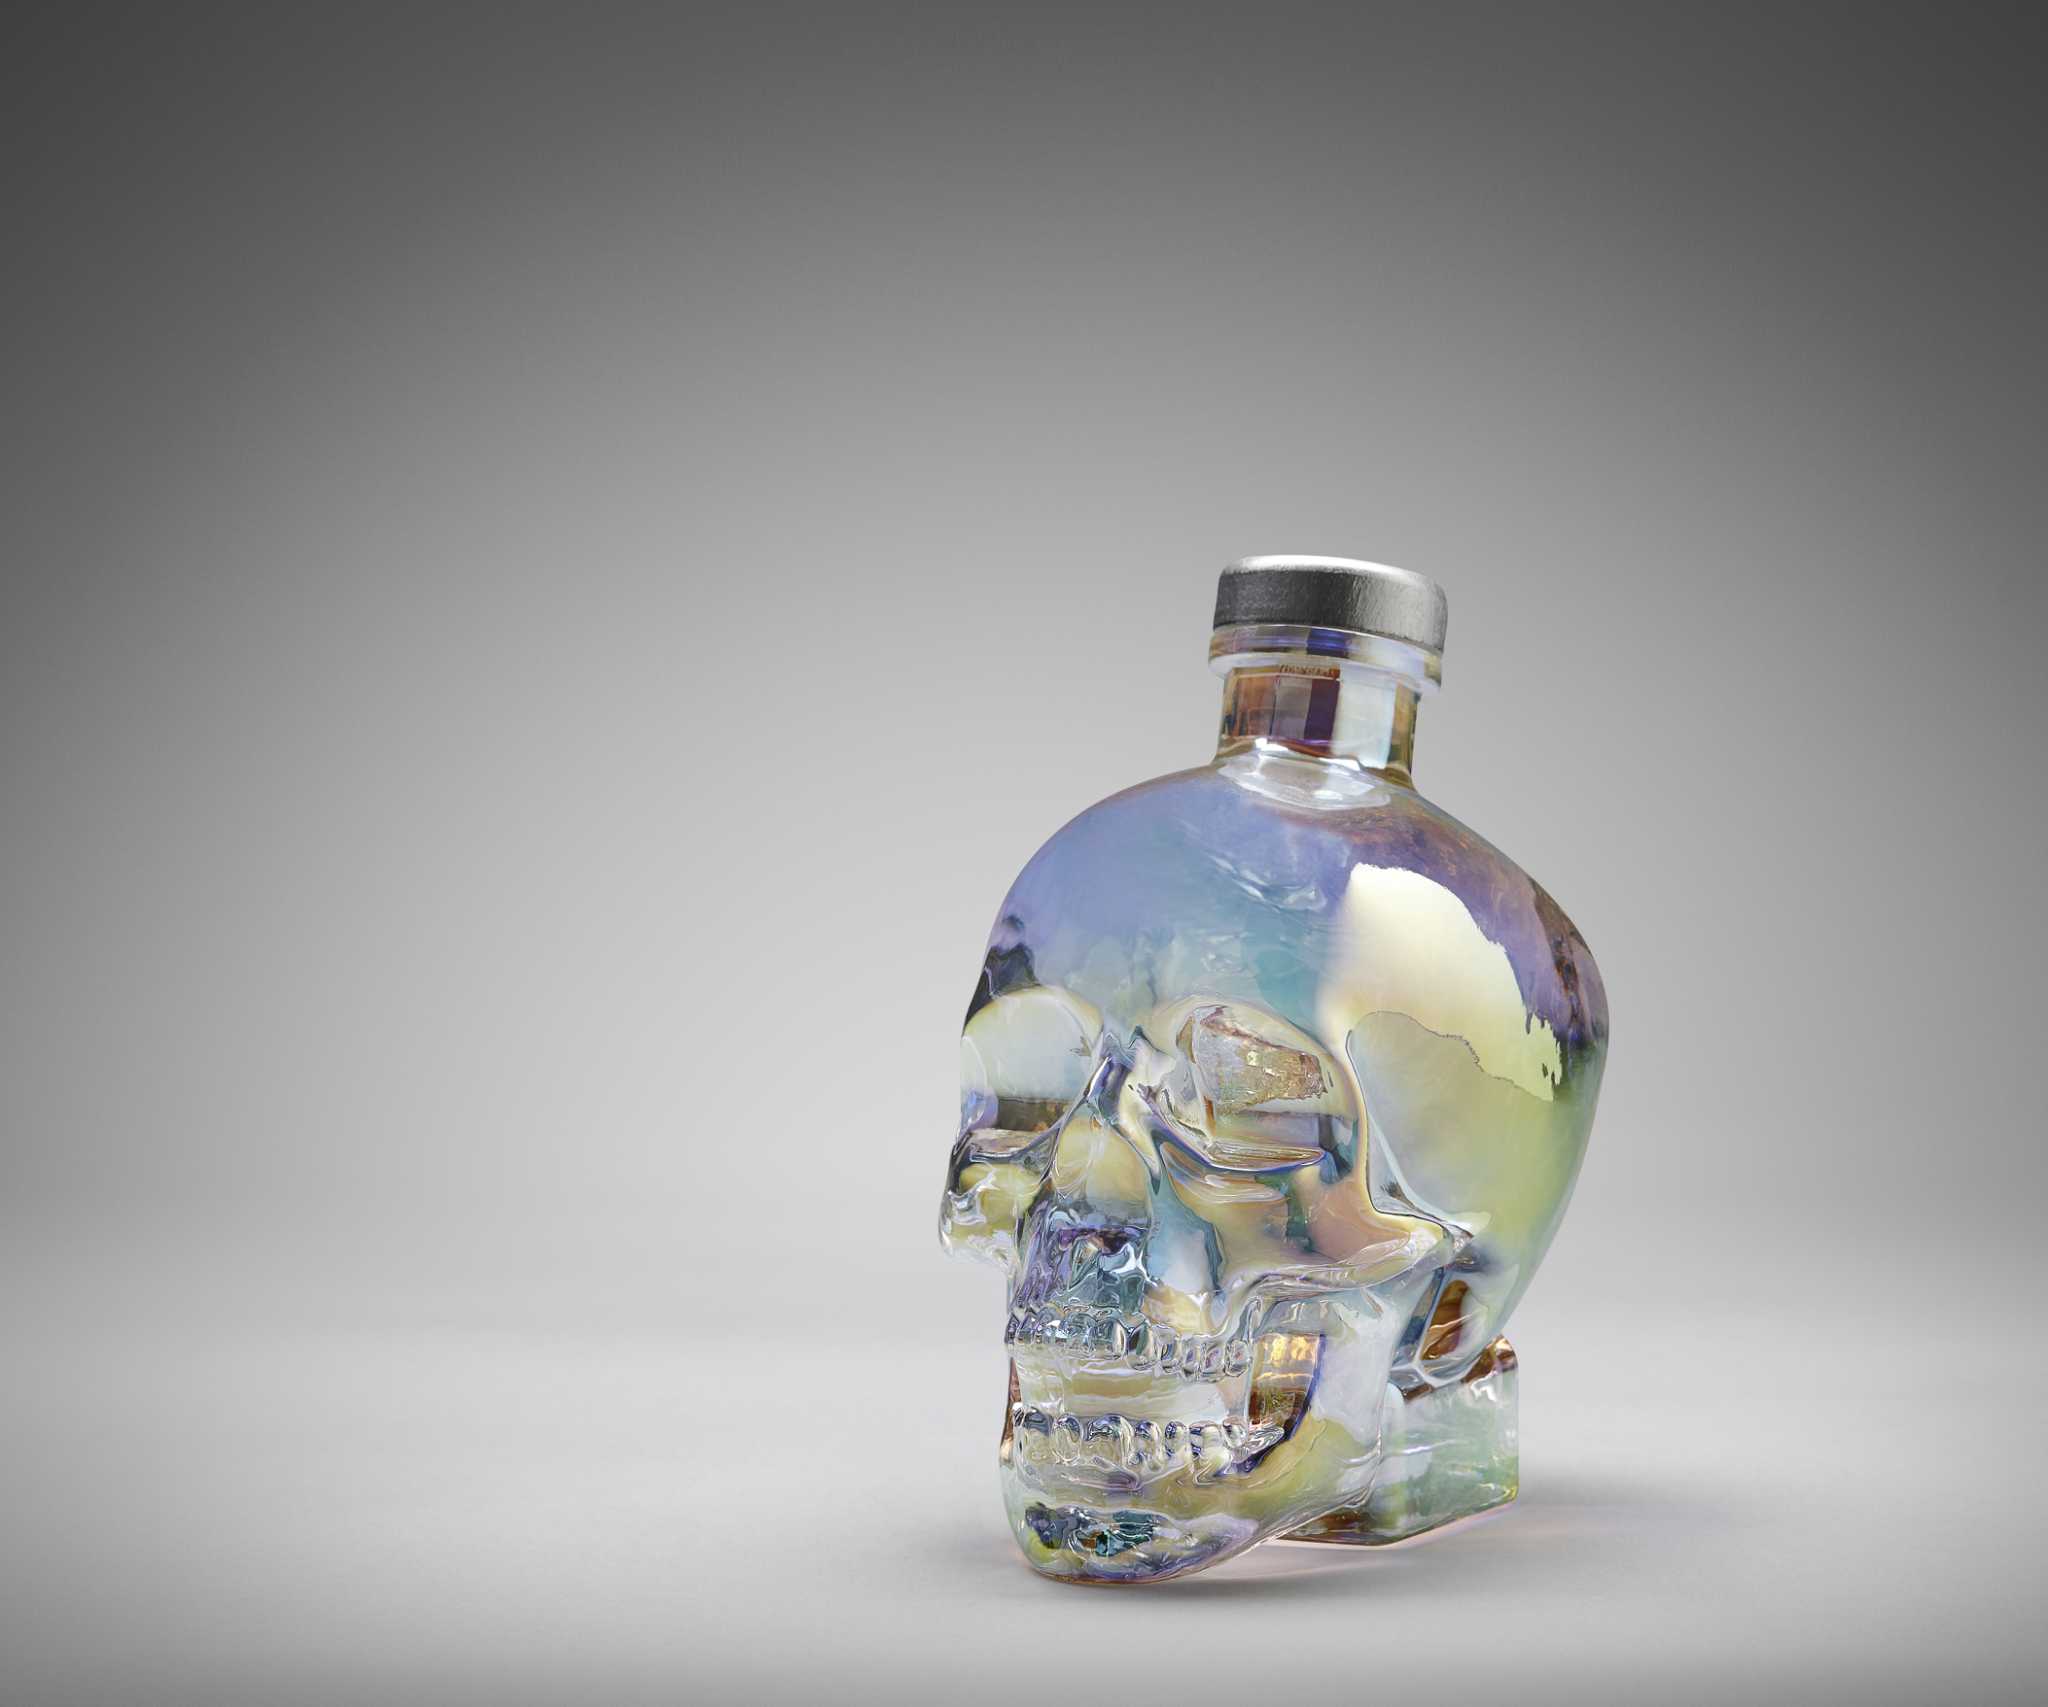 New Head-turning Vodka Perfect For Halloween photo